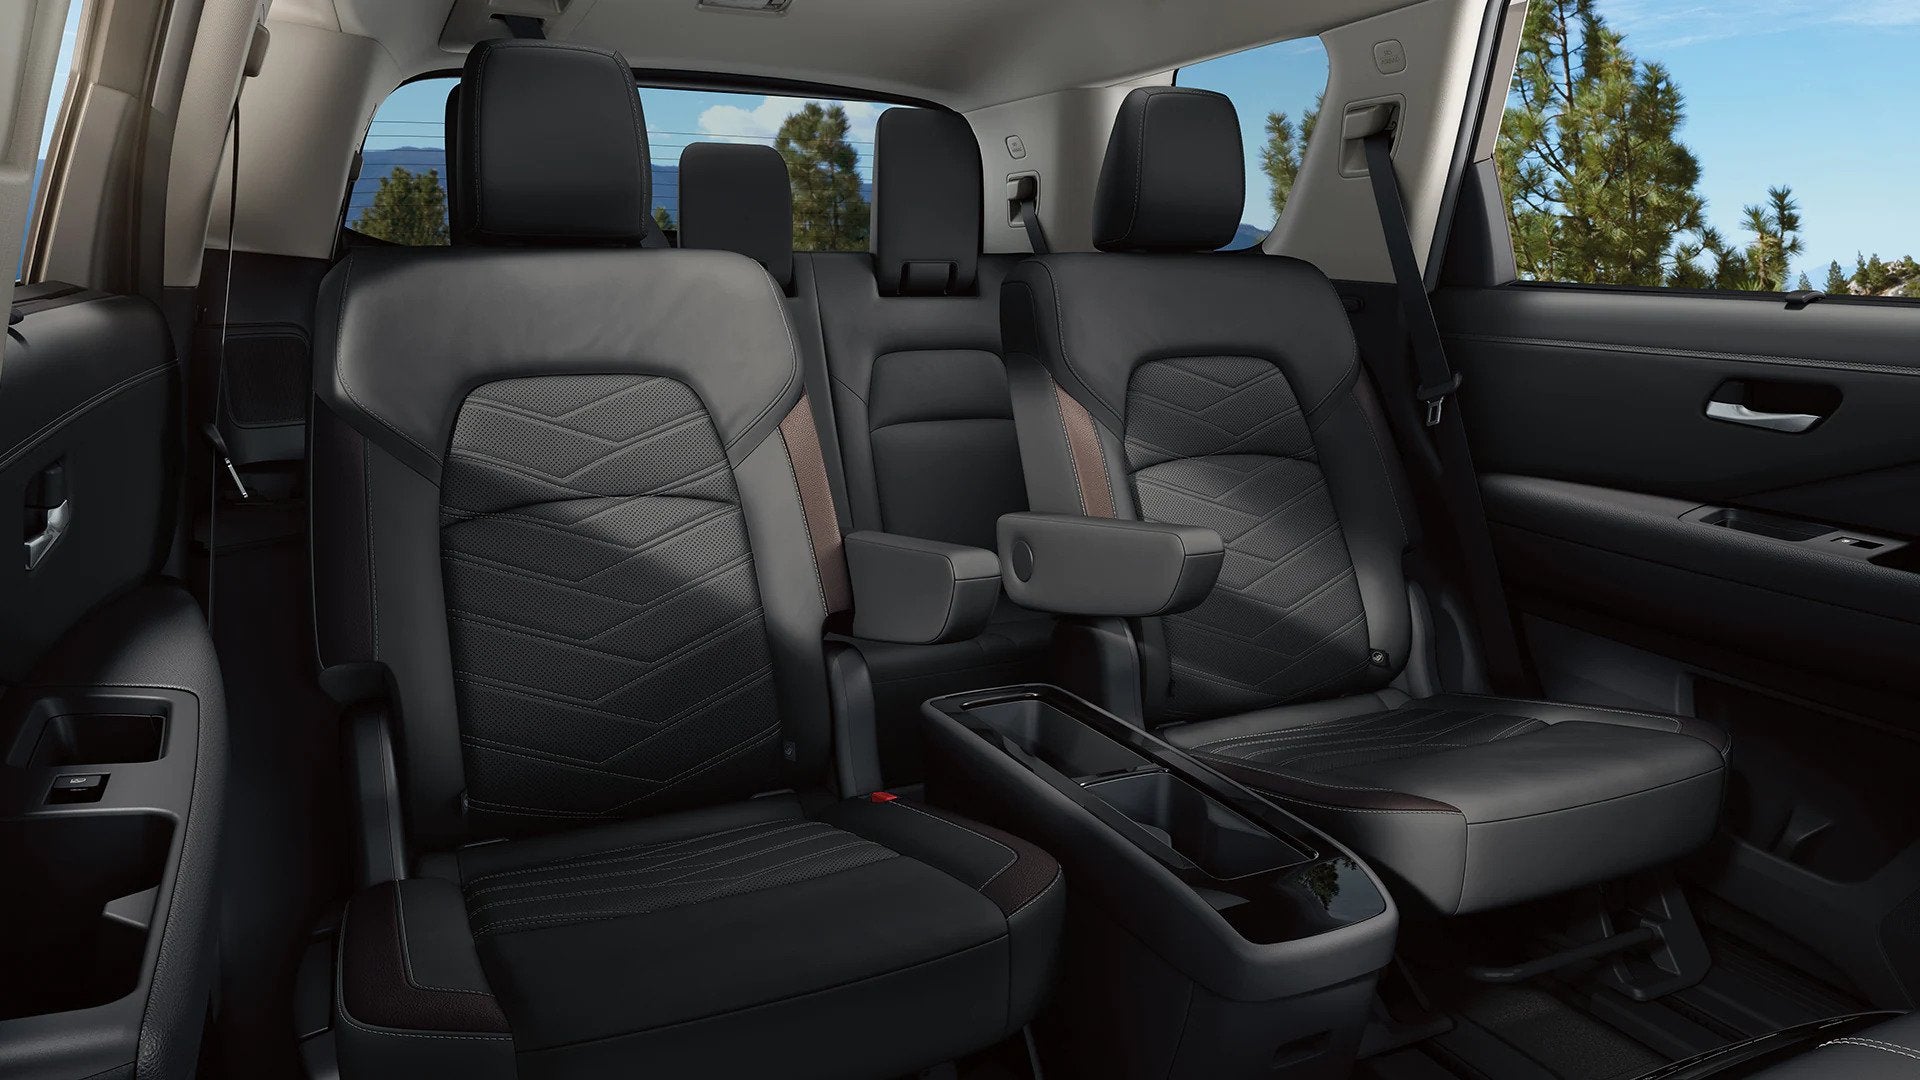 captains chairs and seating in the nissan pathfinder